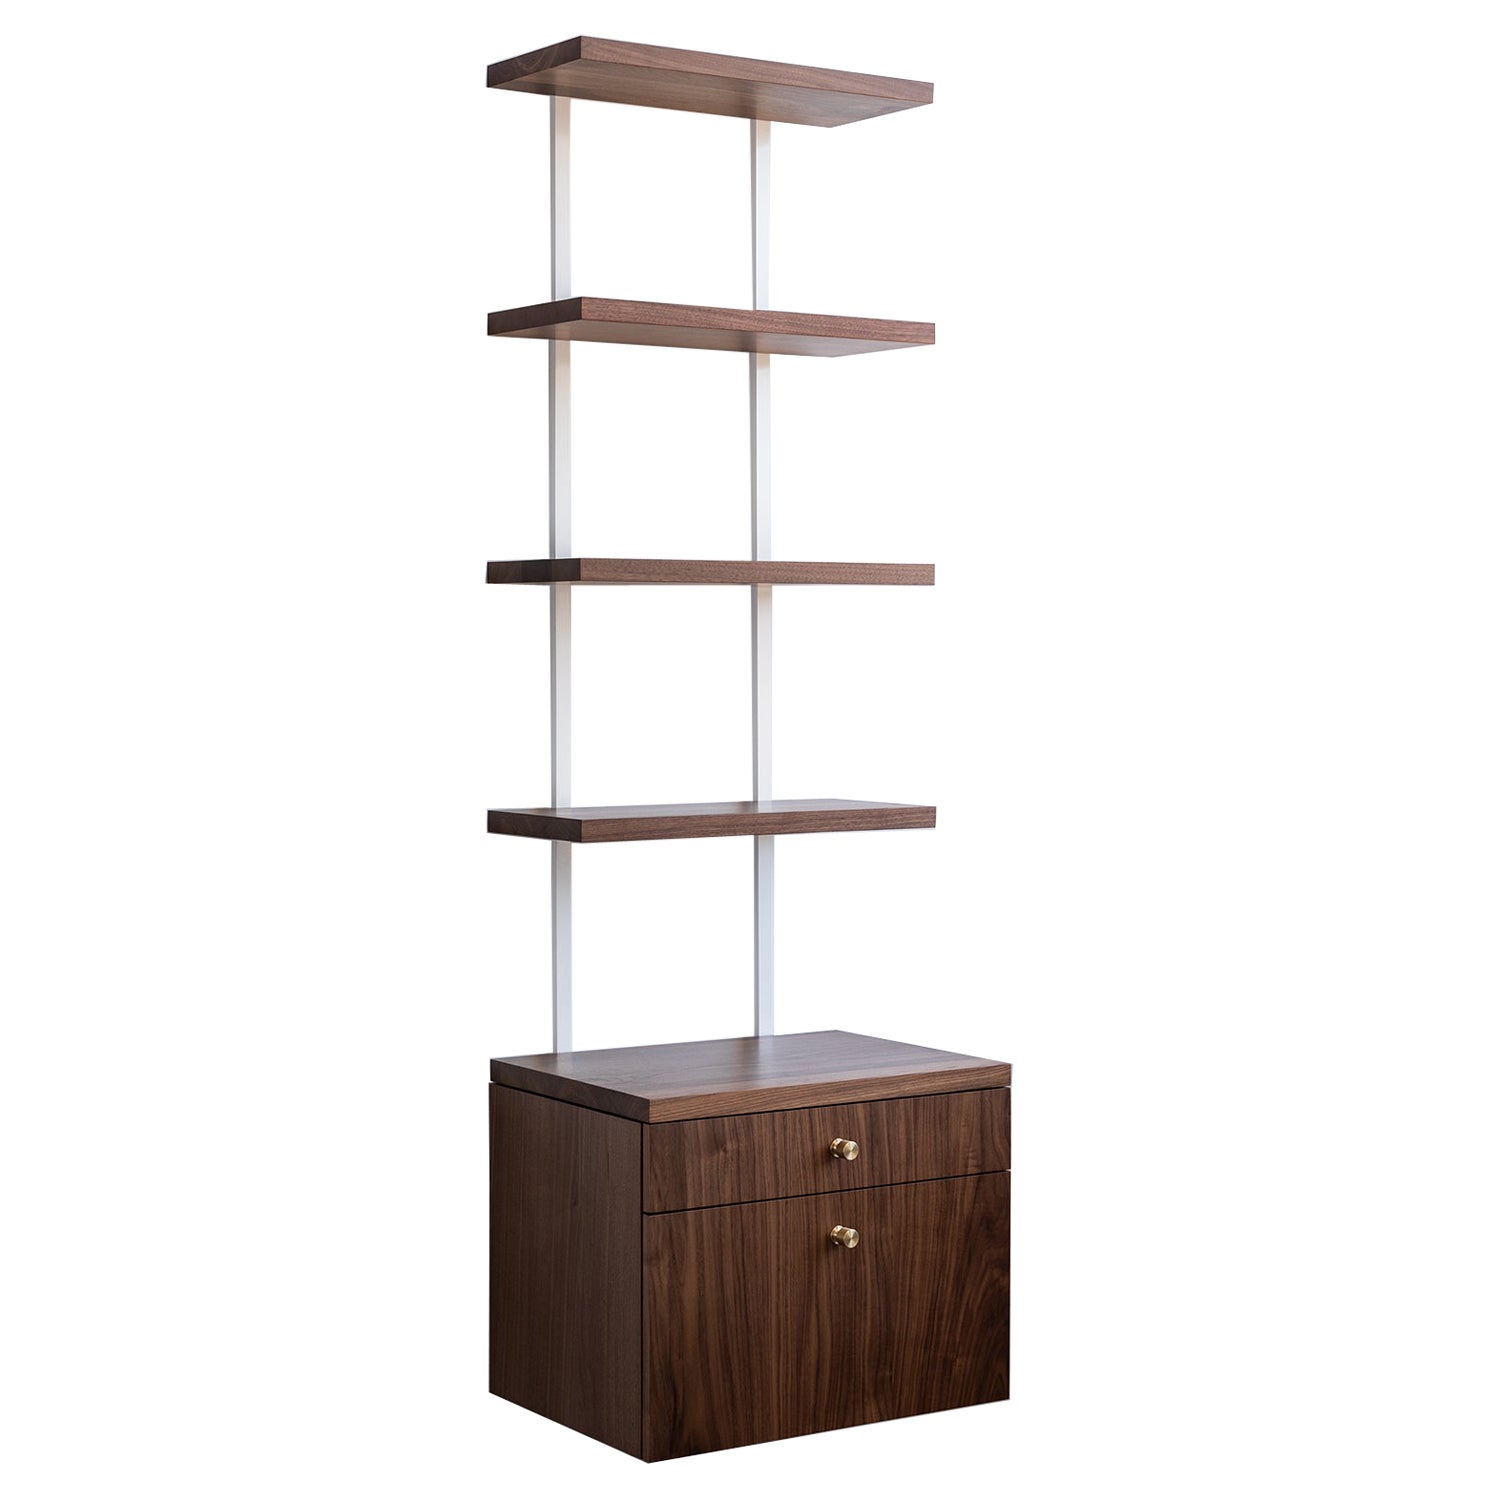 AS6 wall unit 24" wide shelves & drawer cabinet in solid walnut For Sale